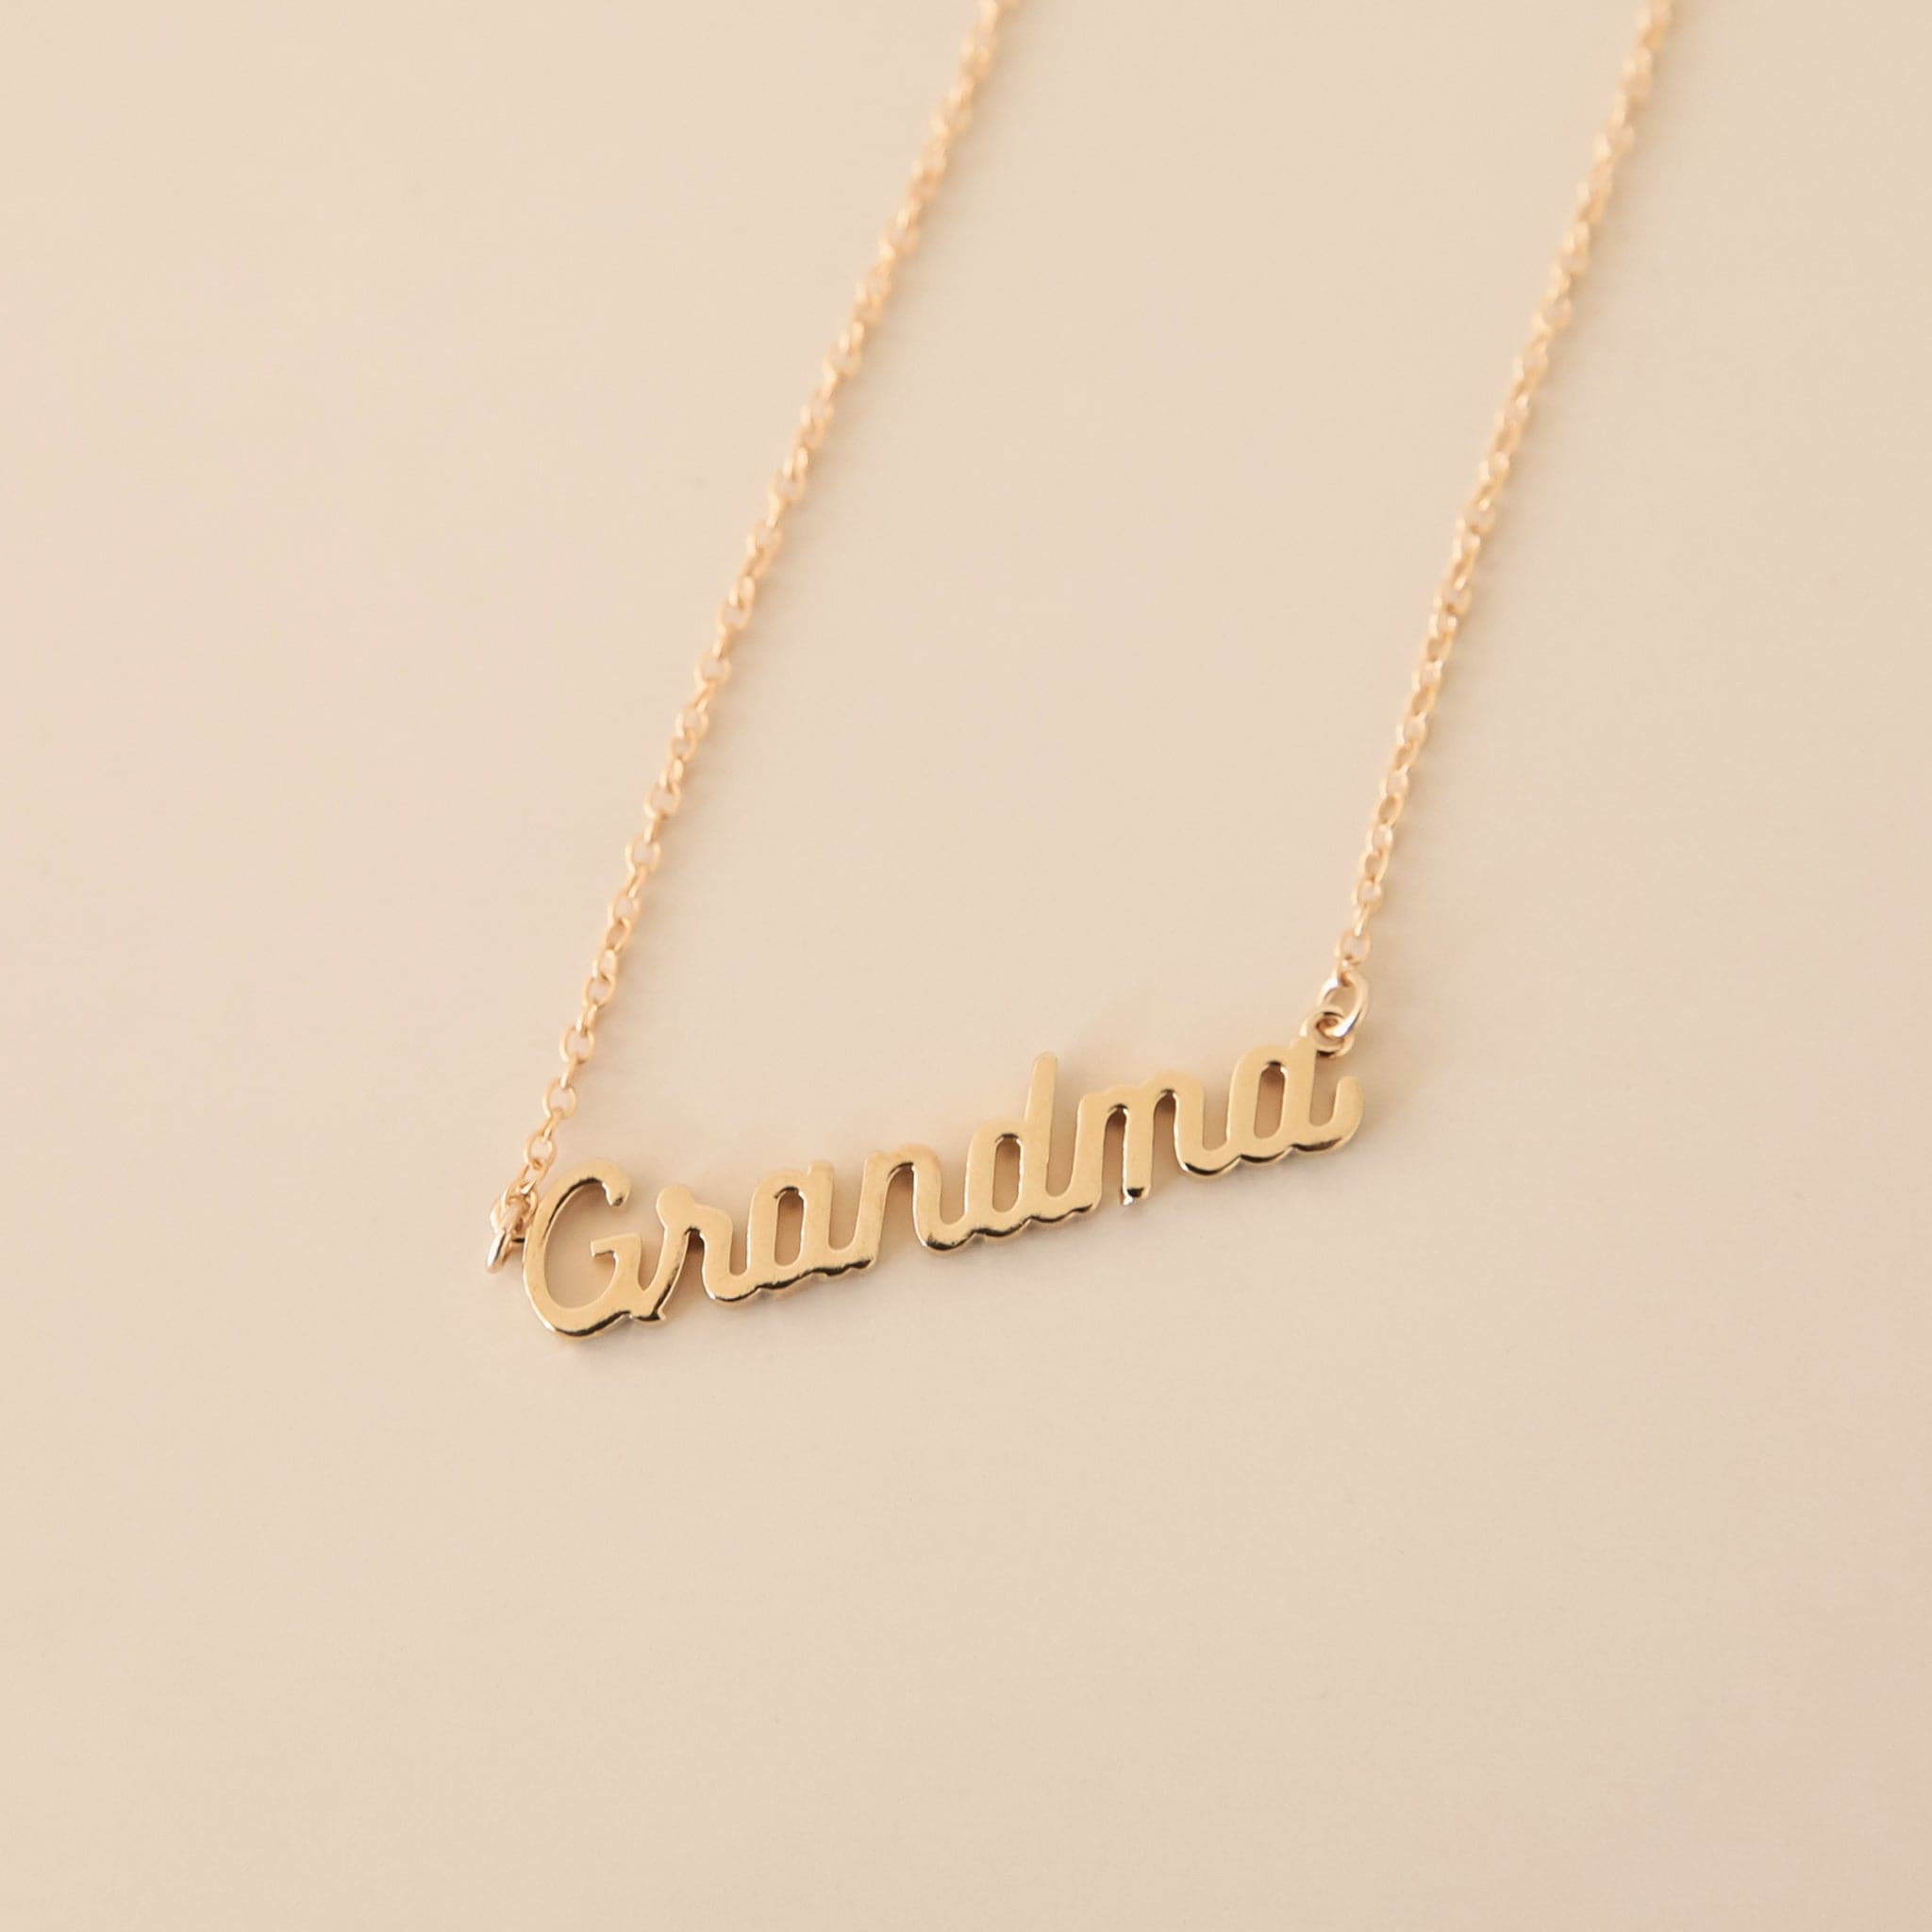 A dainty gold chain necklace with gold letters that read, "Grandma" as a pendant.